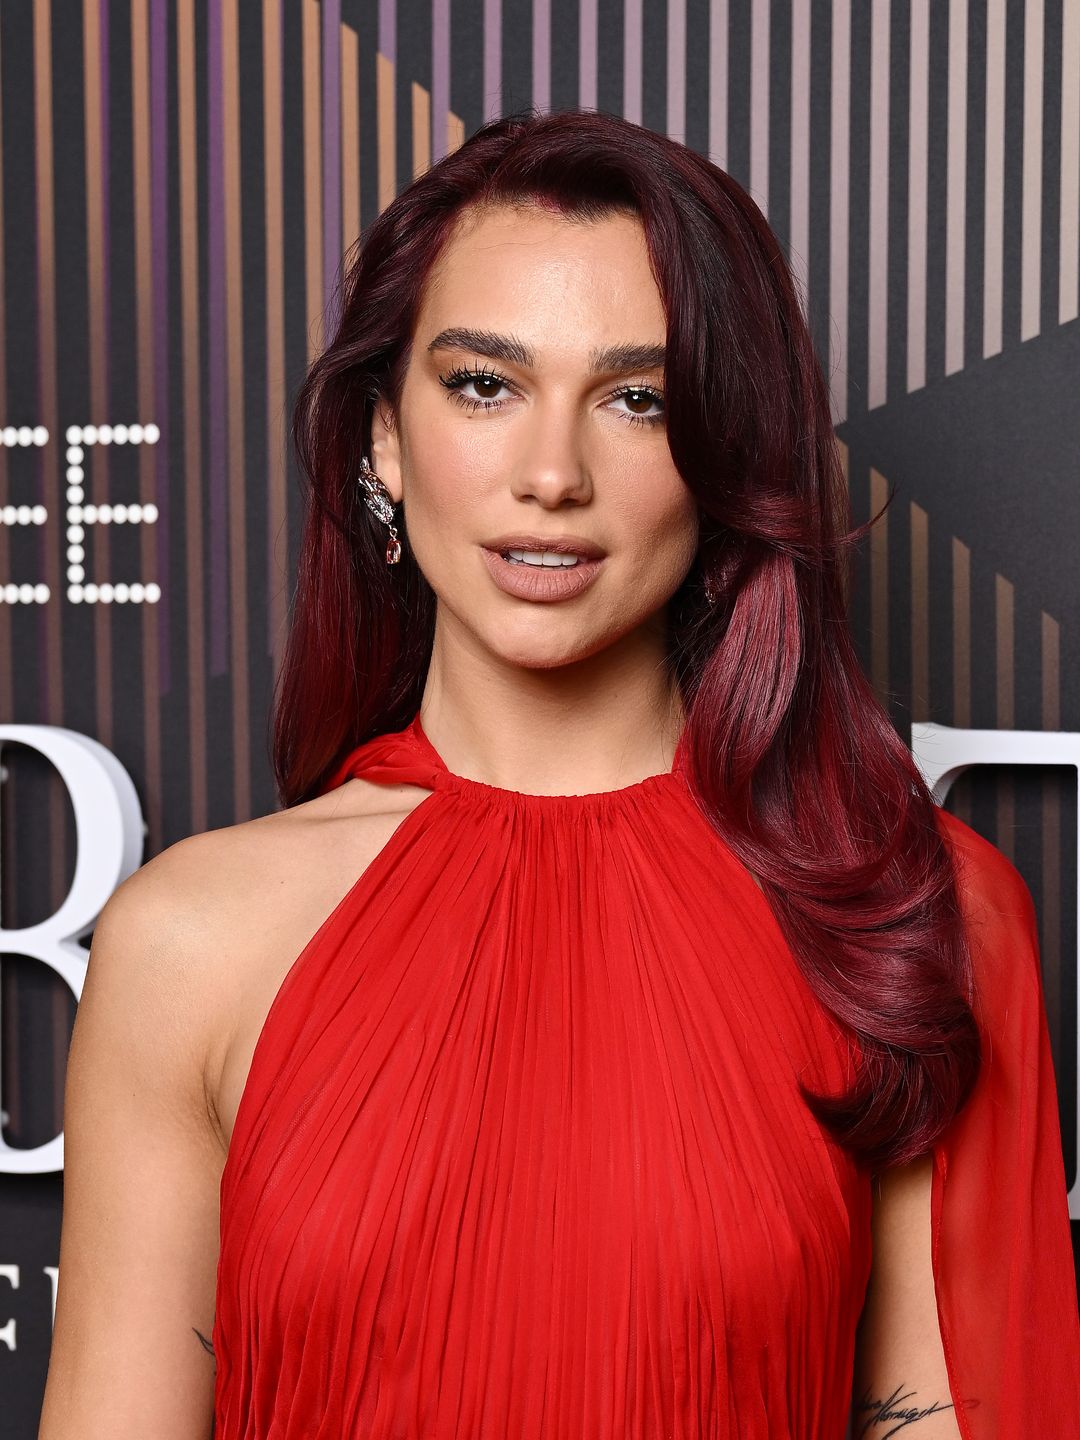 Dua Lipa wearing a red gown at the BAFTAs 